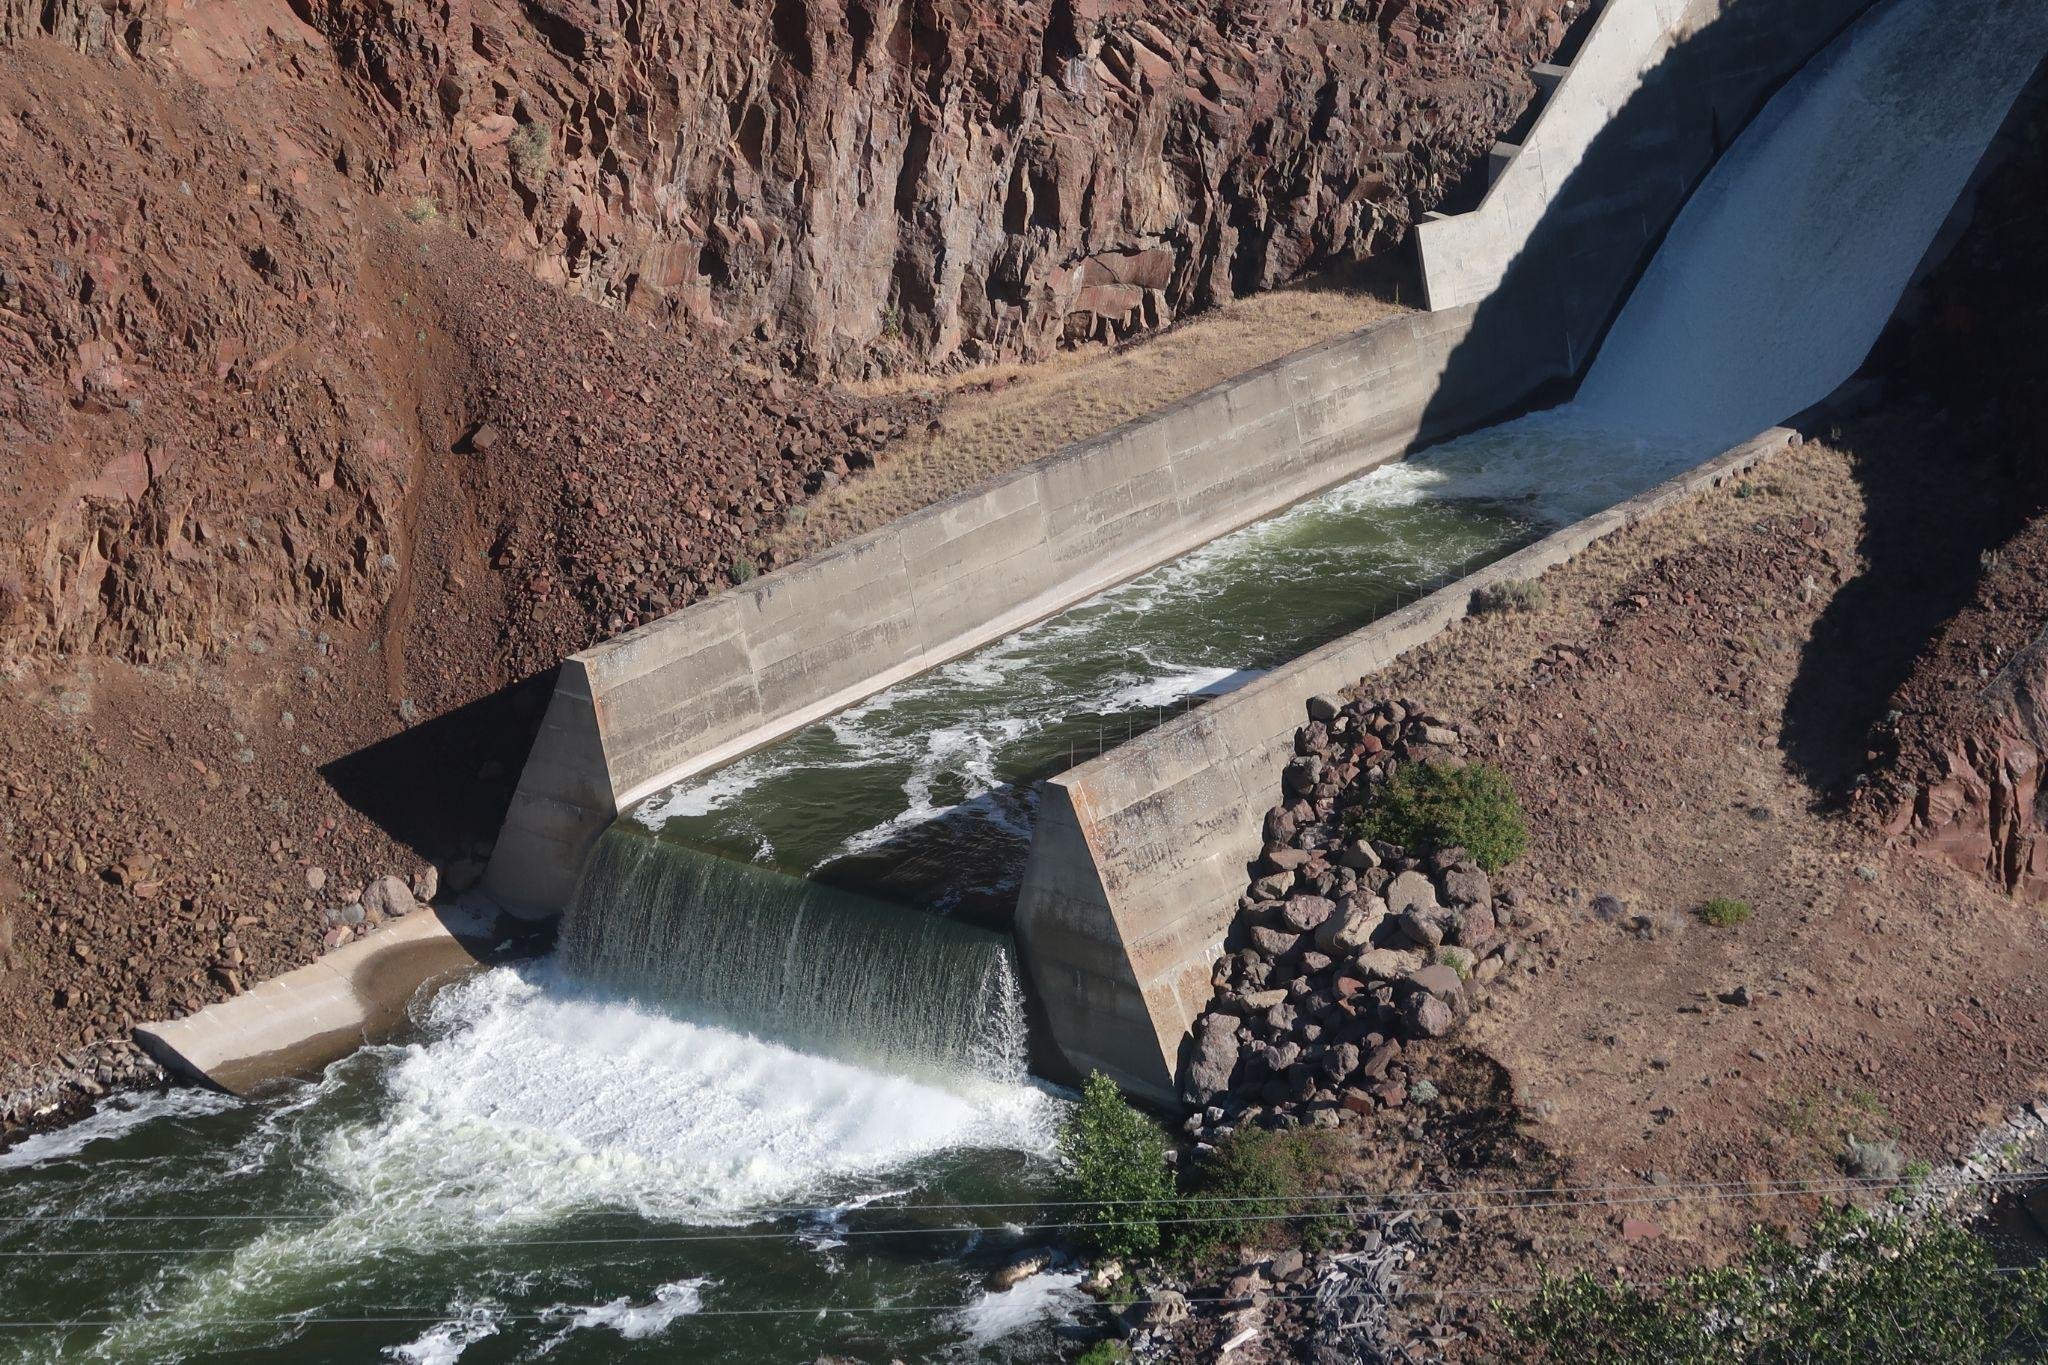 Iron Gate Spillway. Image Credit Will Harling